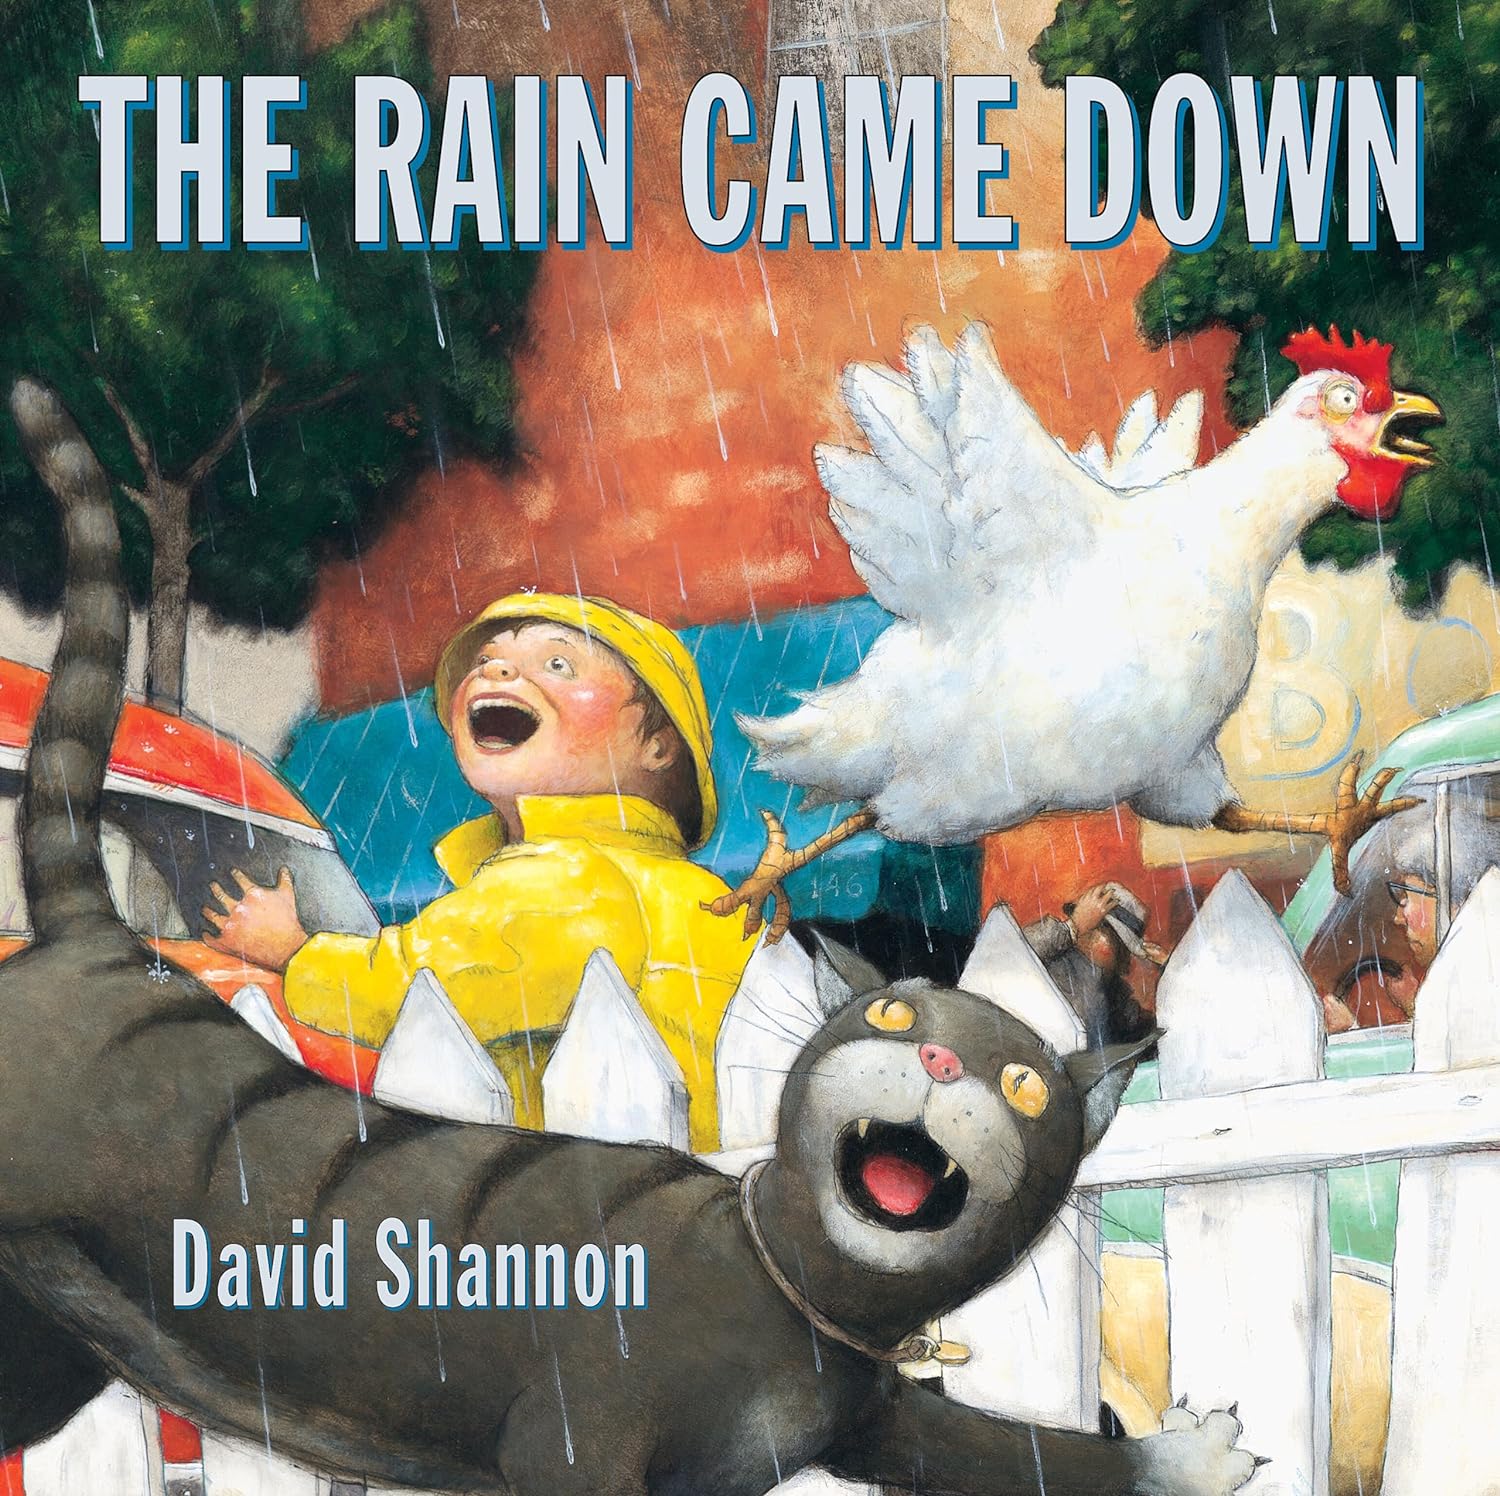 Image for "The Rain Came Down"